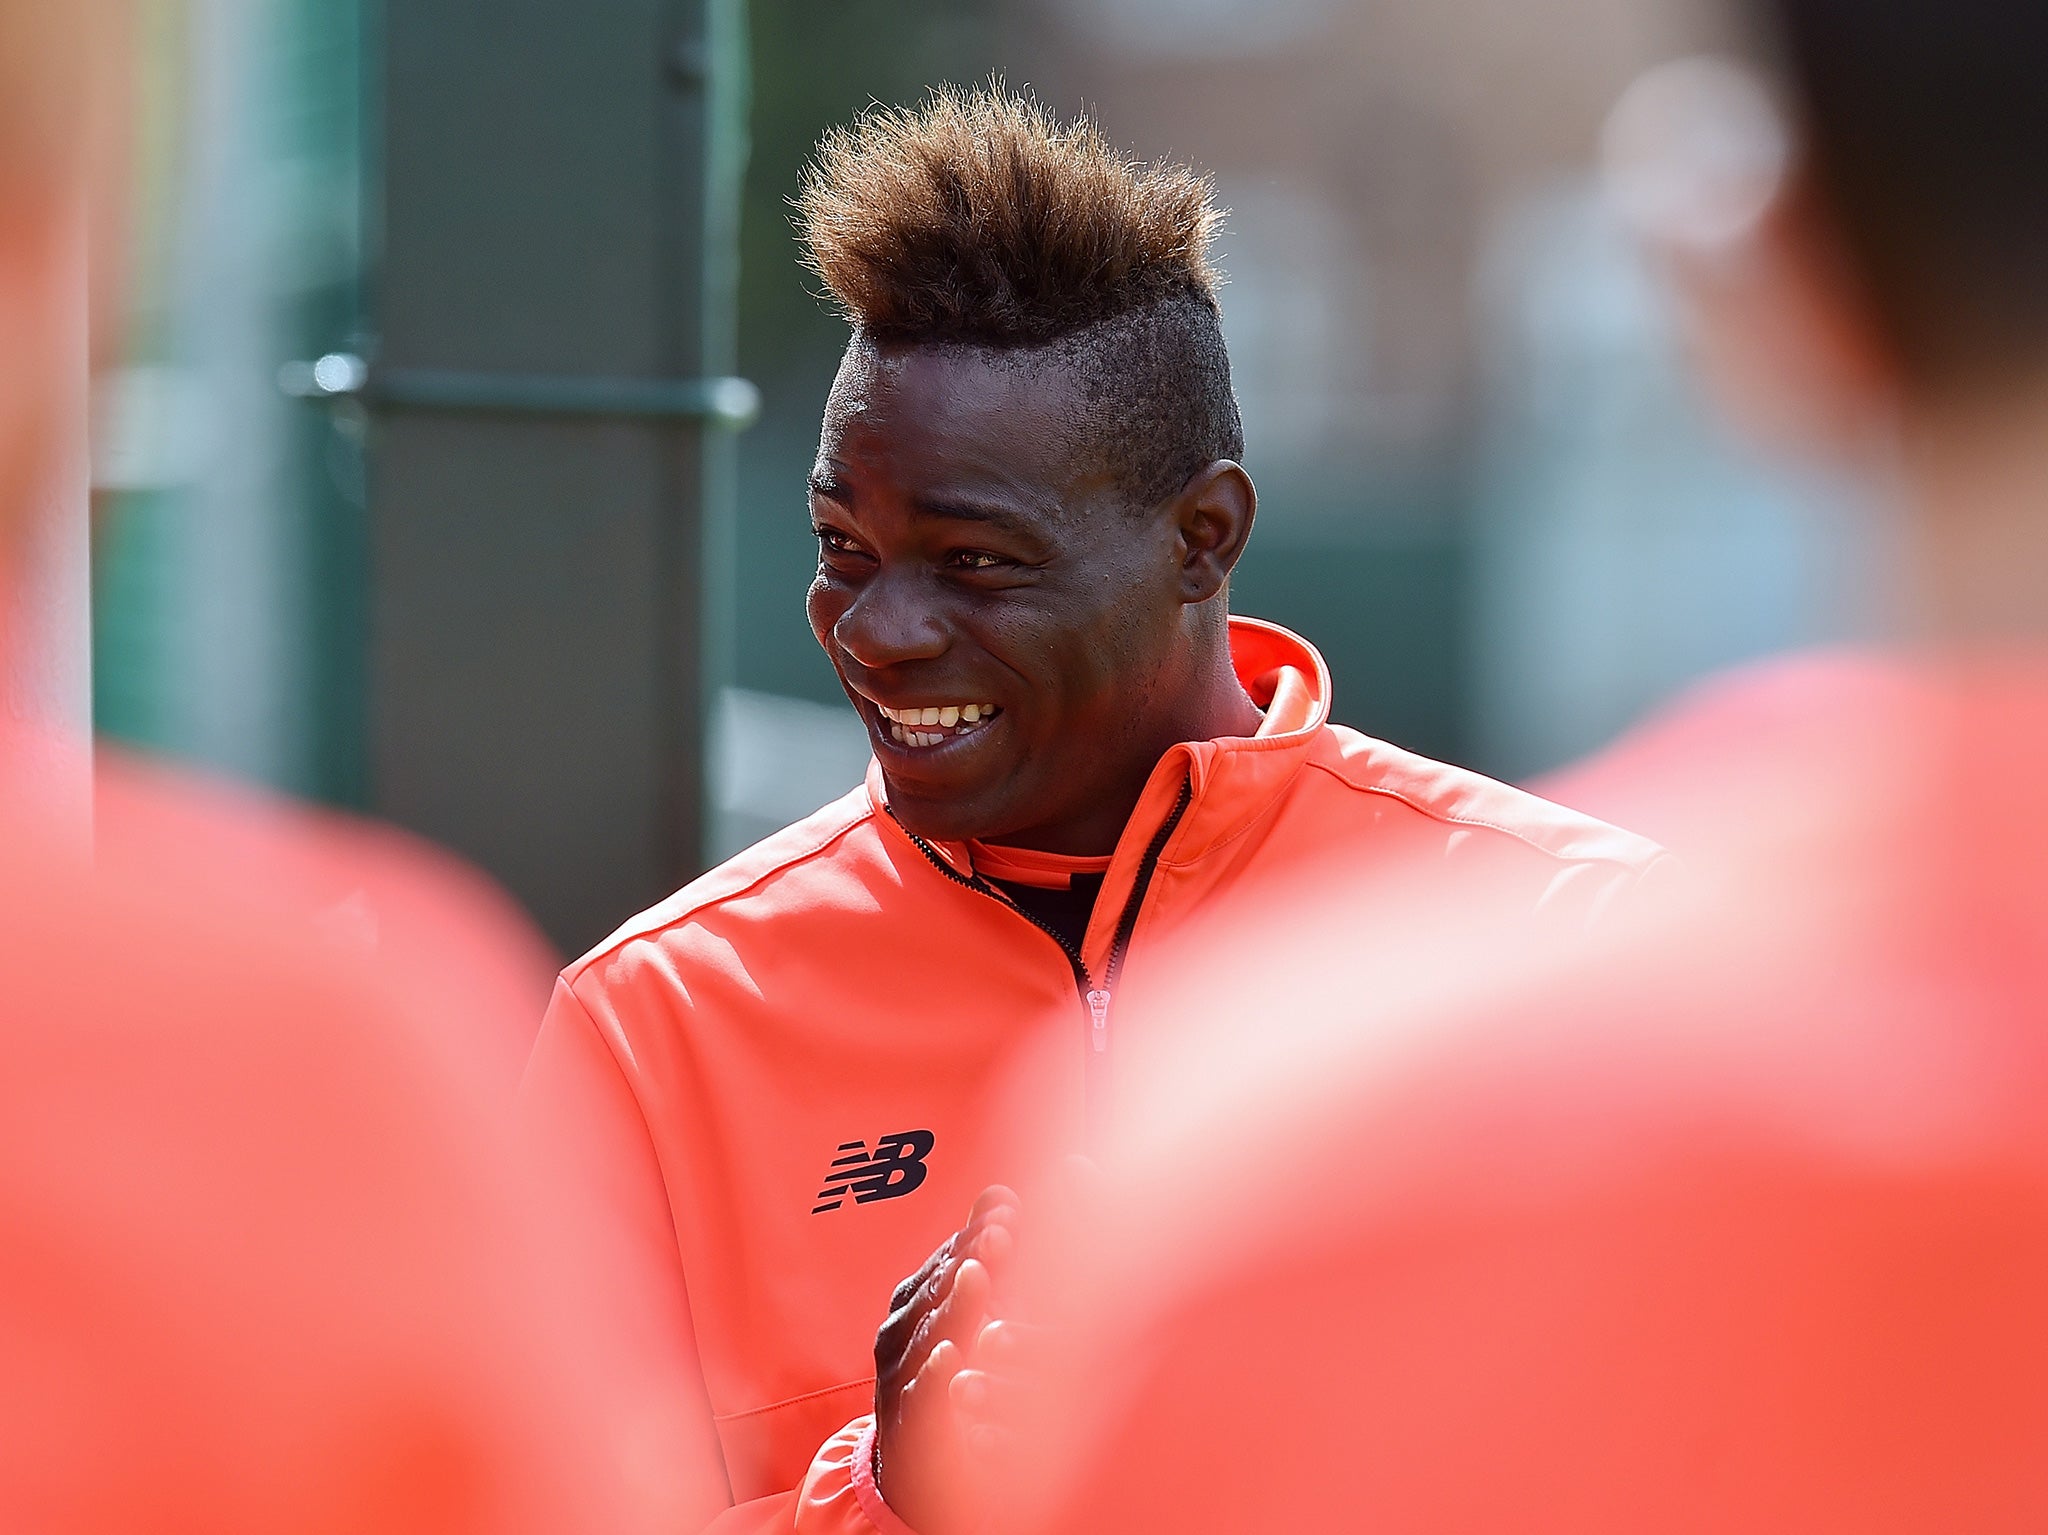 Balotelli has not been taken on Liverpool's pre-season tour of the United States